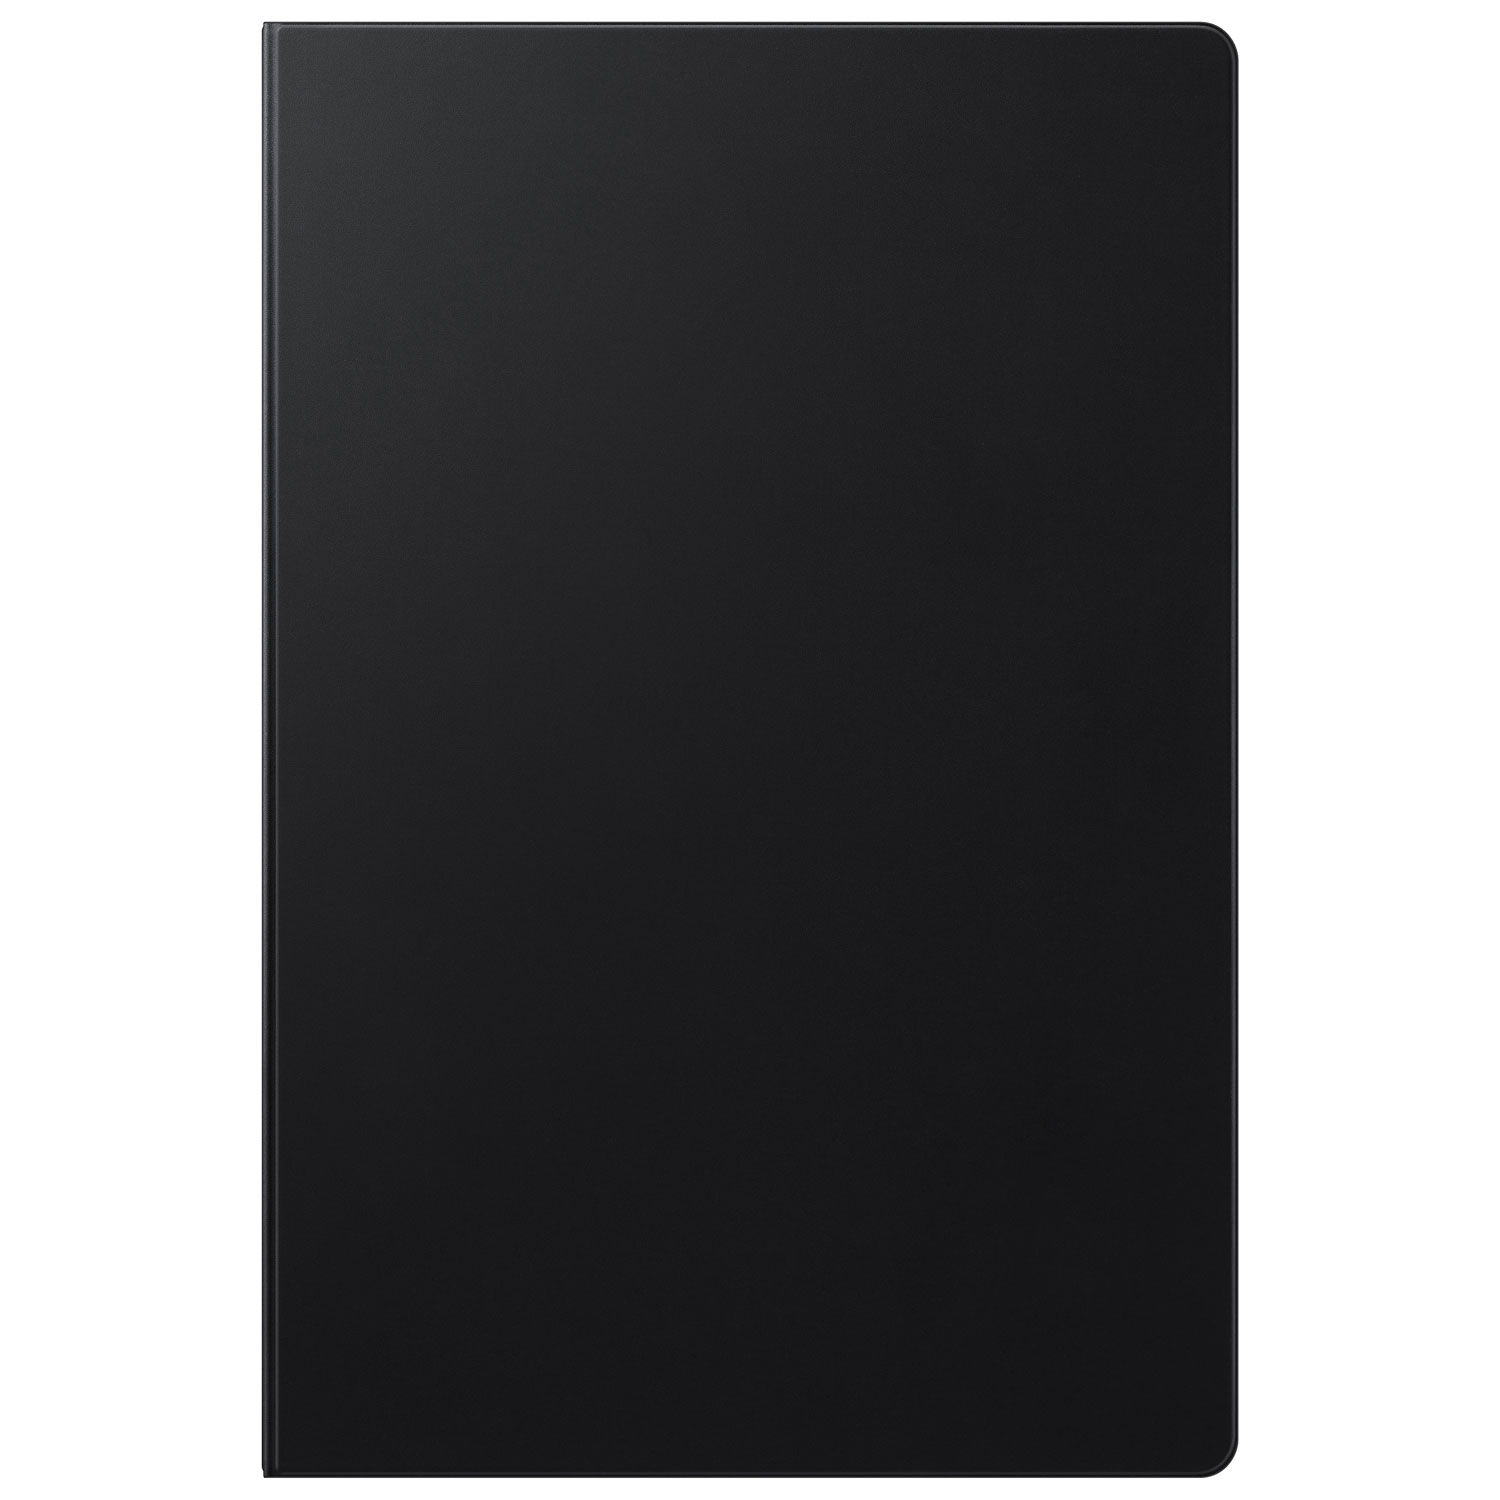 Samsung Book Cover Case for Galaxy Tab S8 Ultra - Black